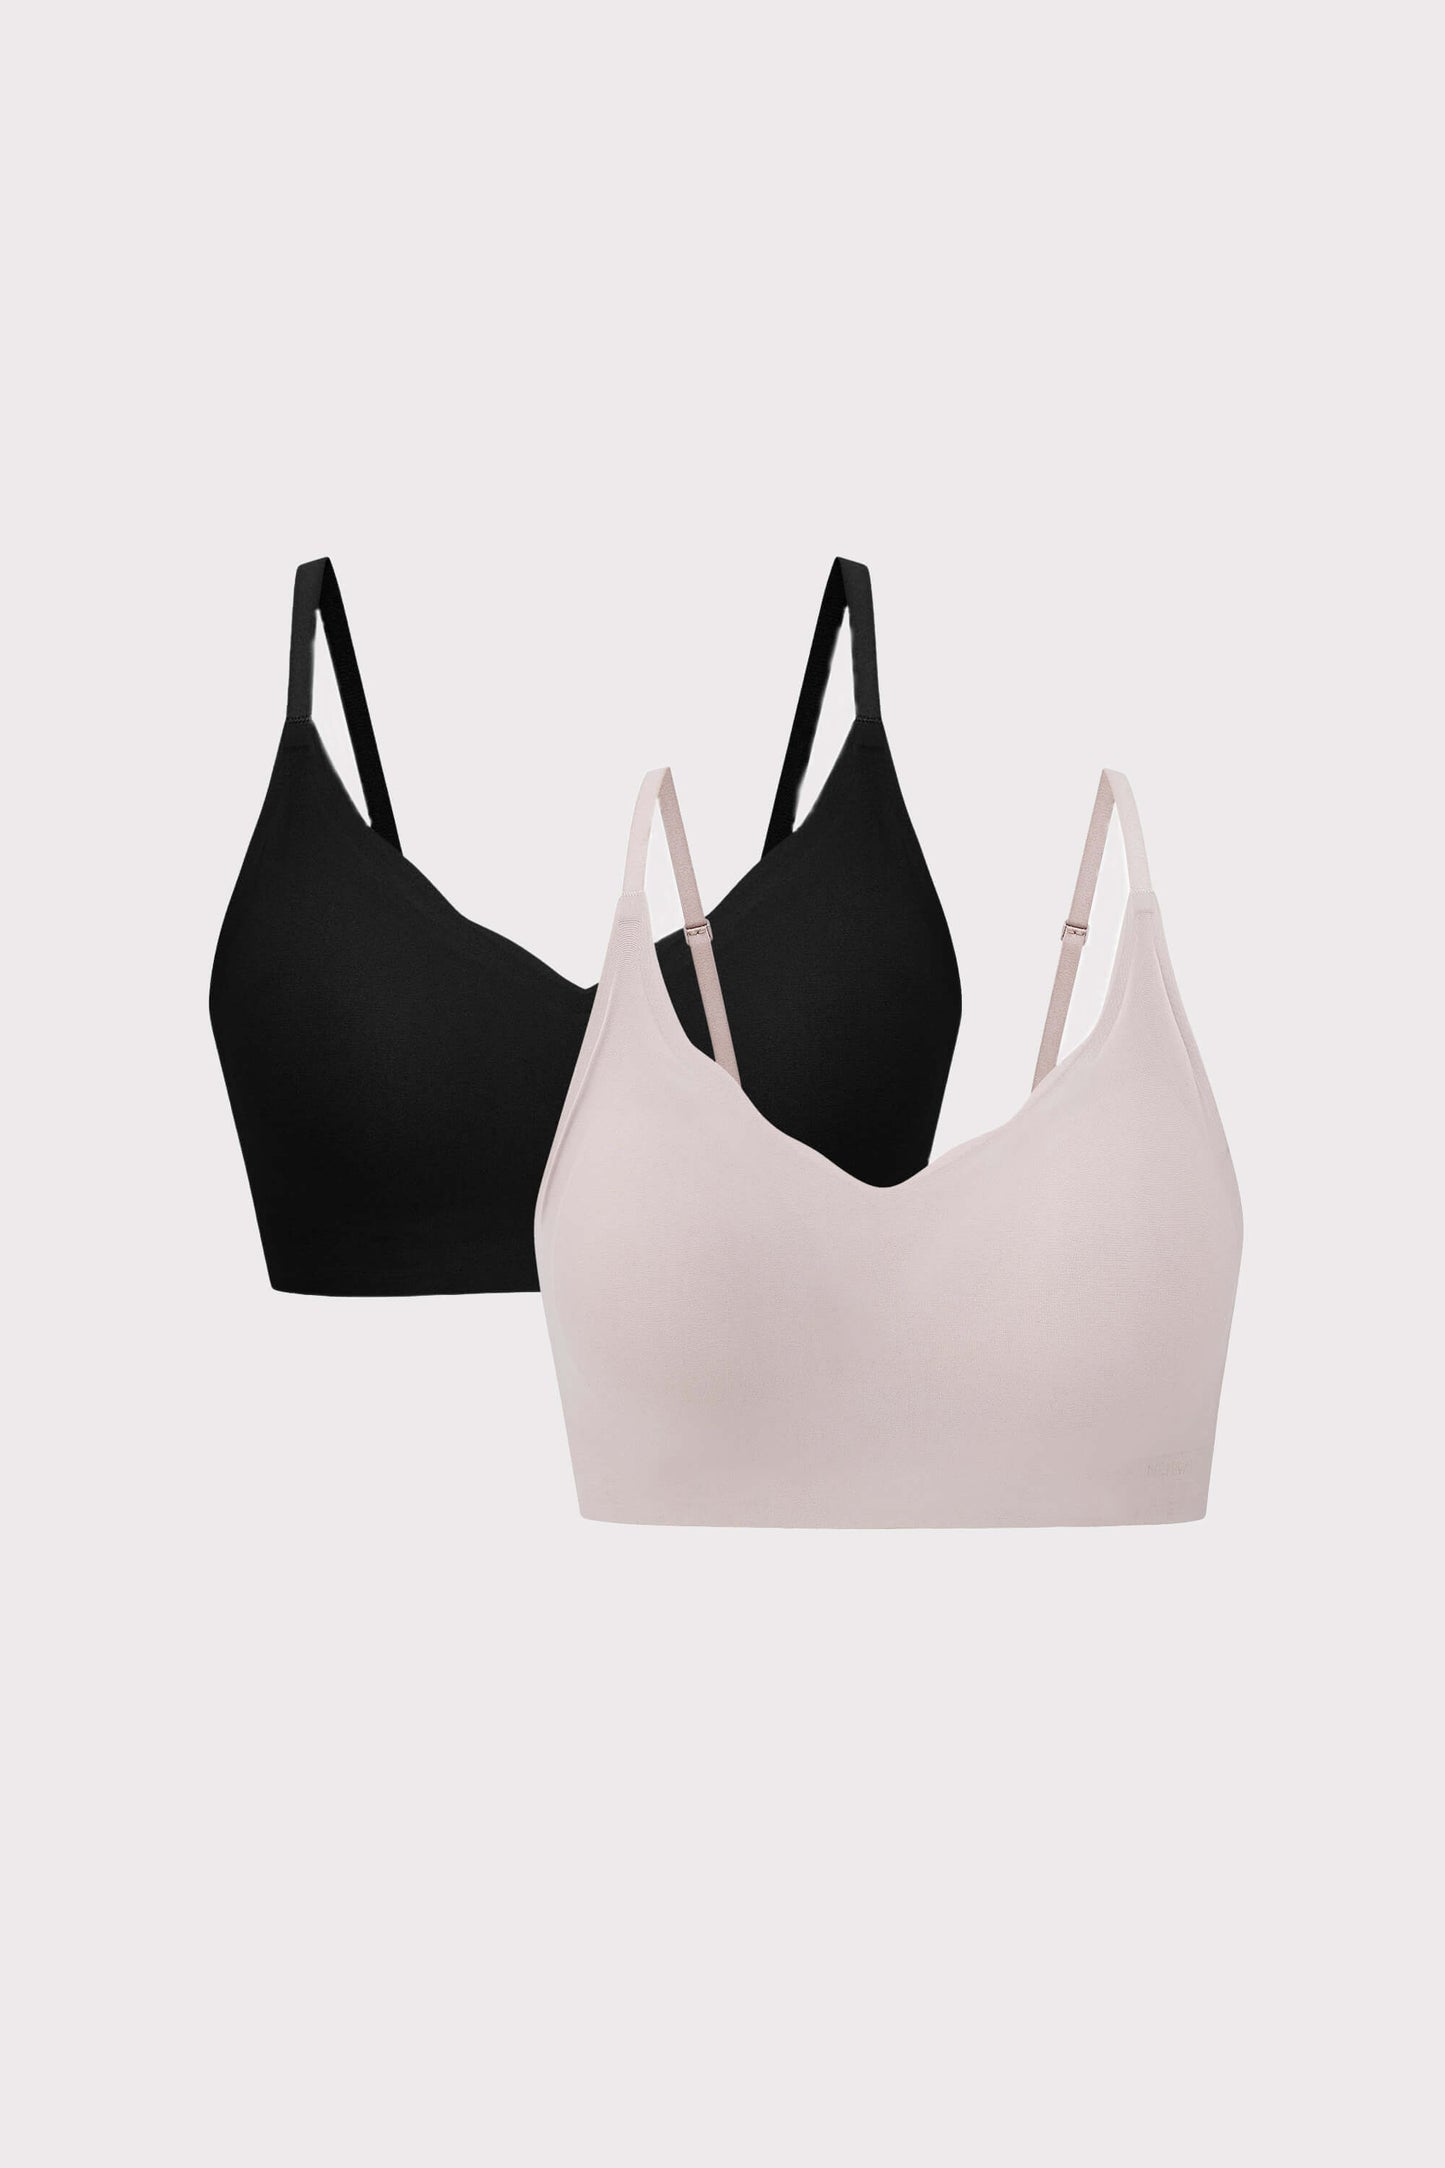 With its lower neckline and fixed-cup design, the Barely Zero